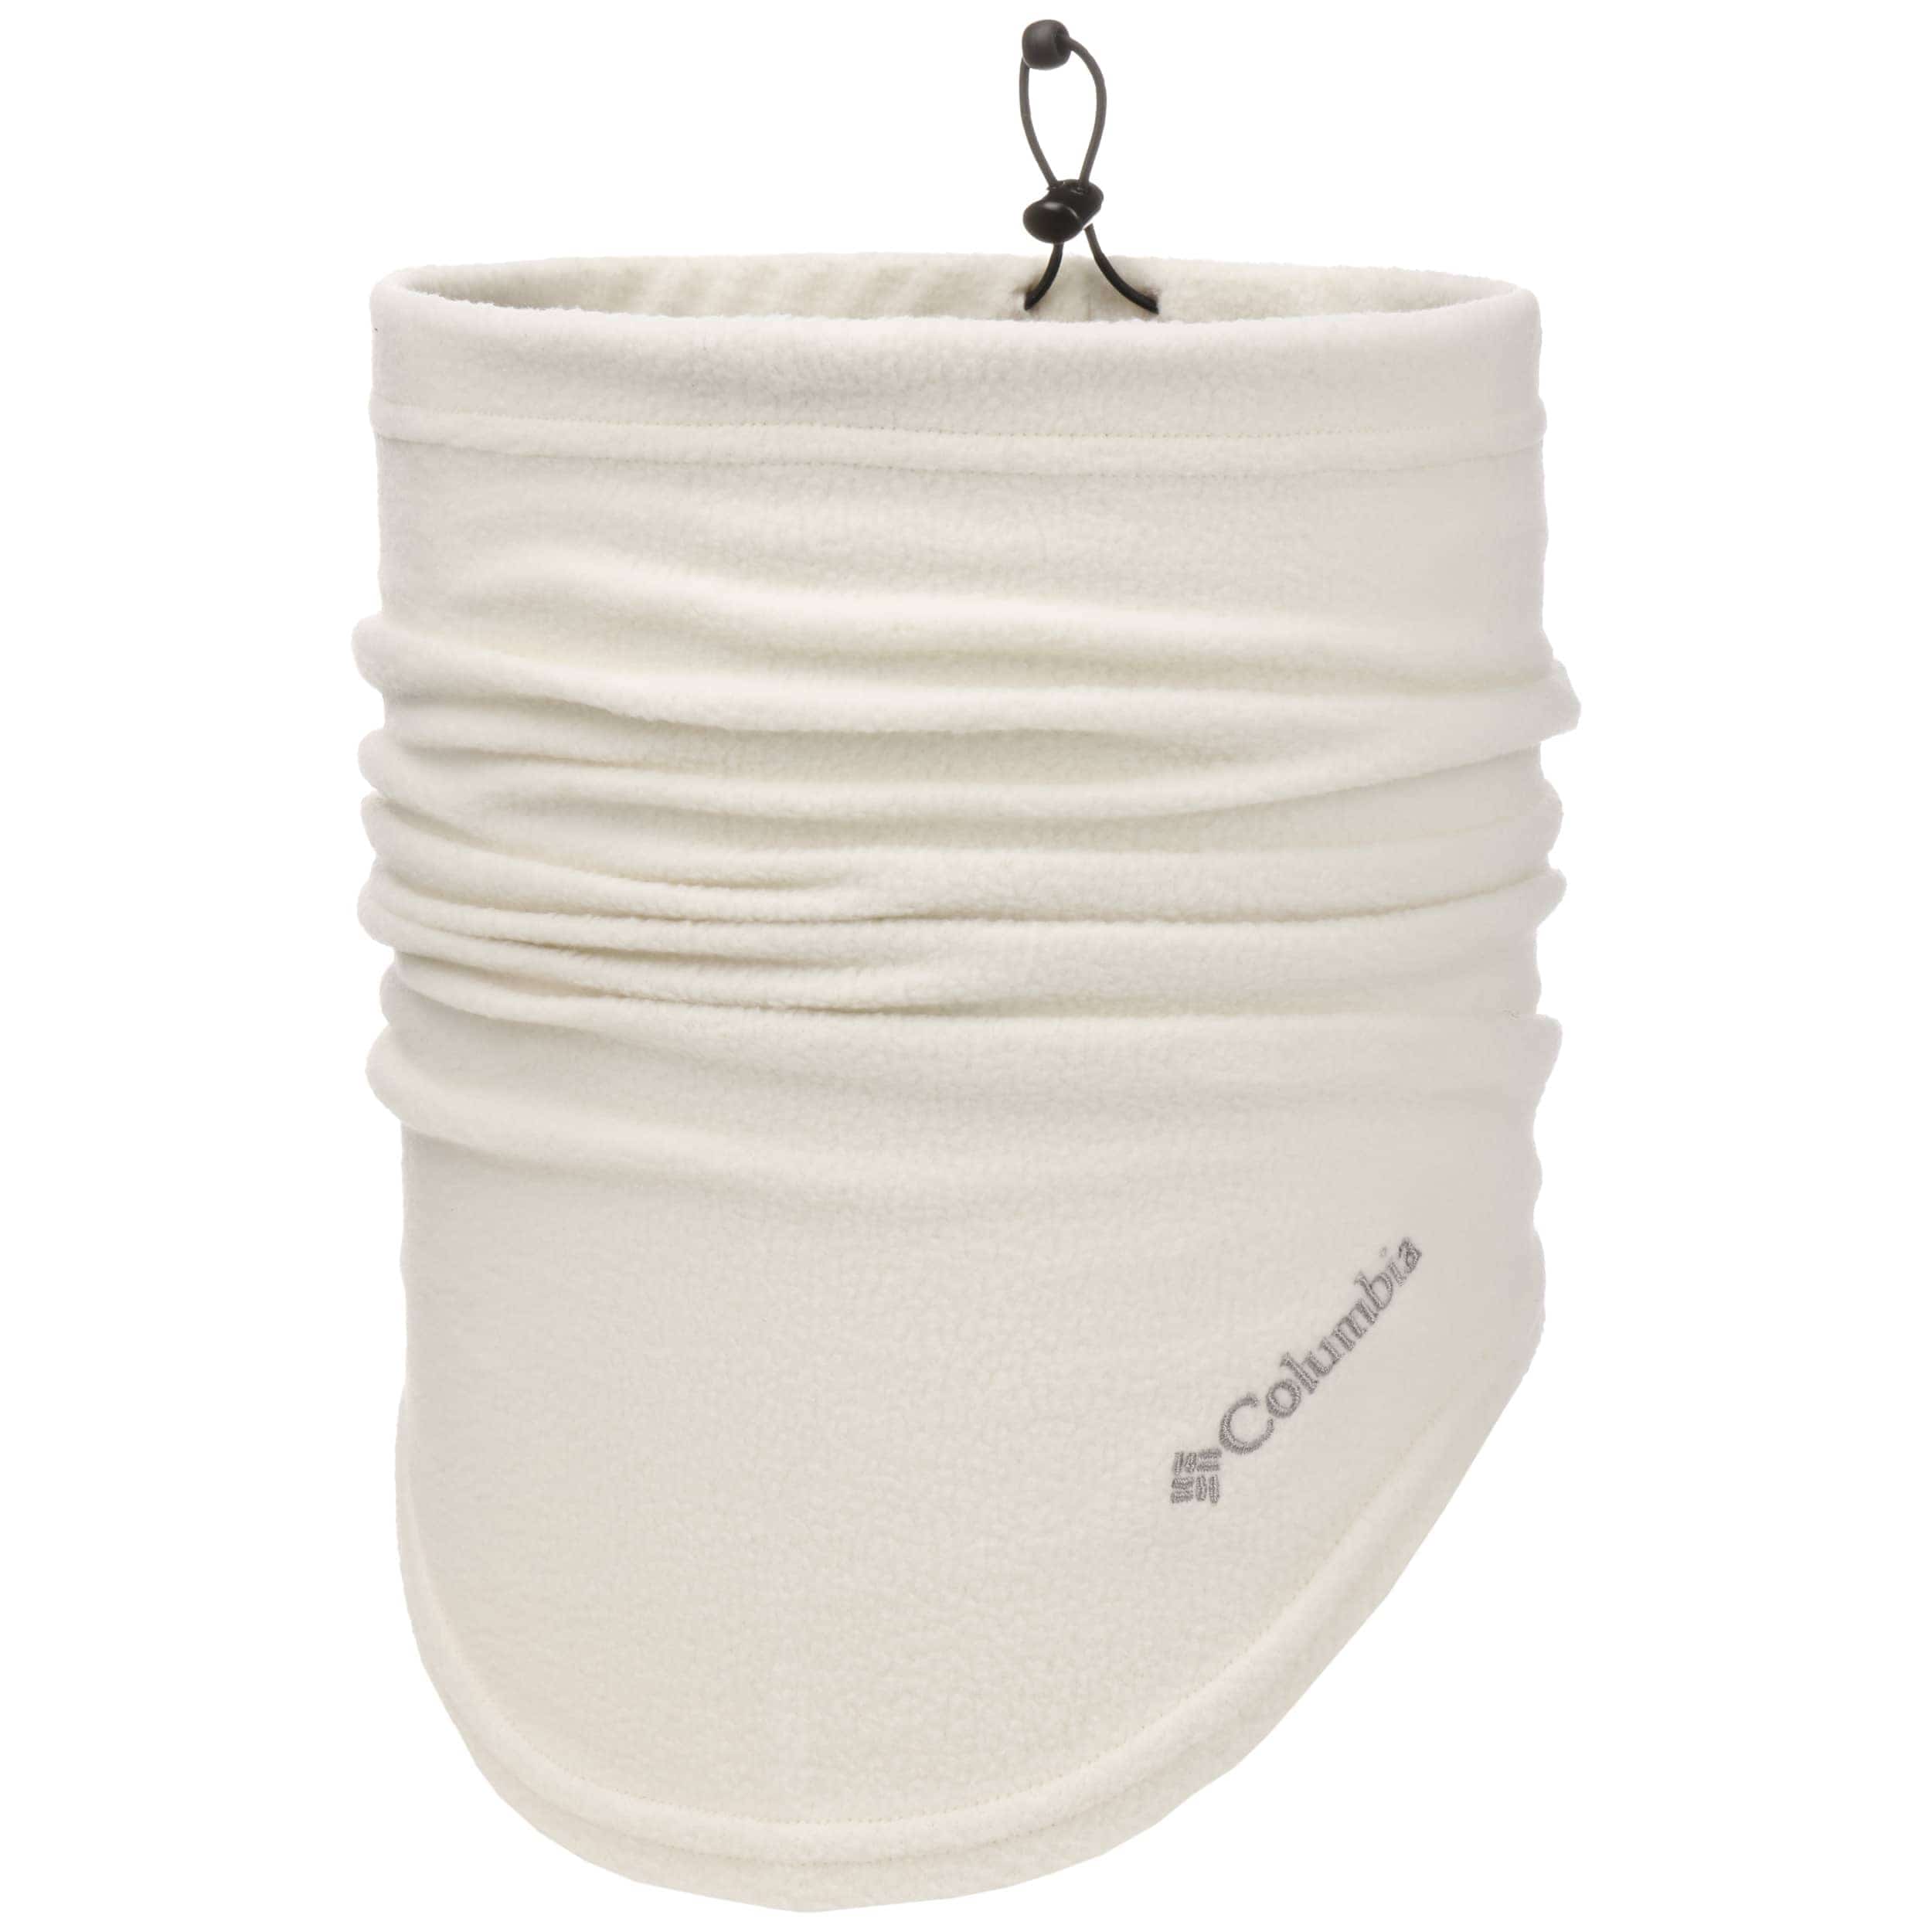 Trail Shaker Neck Gaiter by Columbia - 29,95